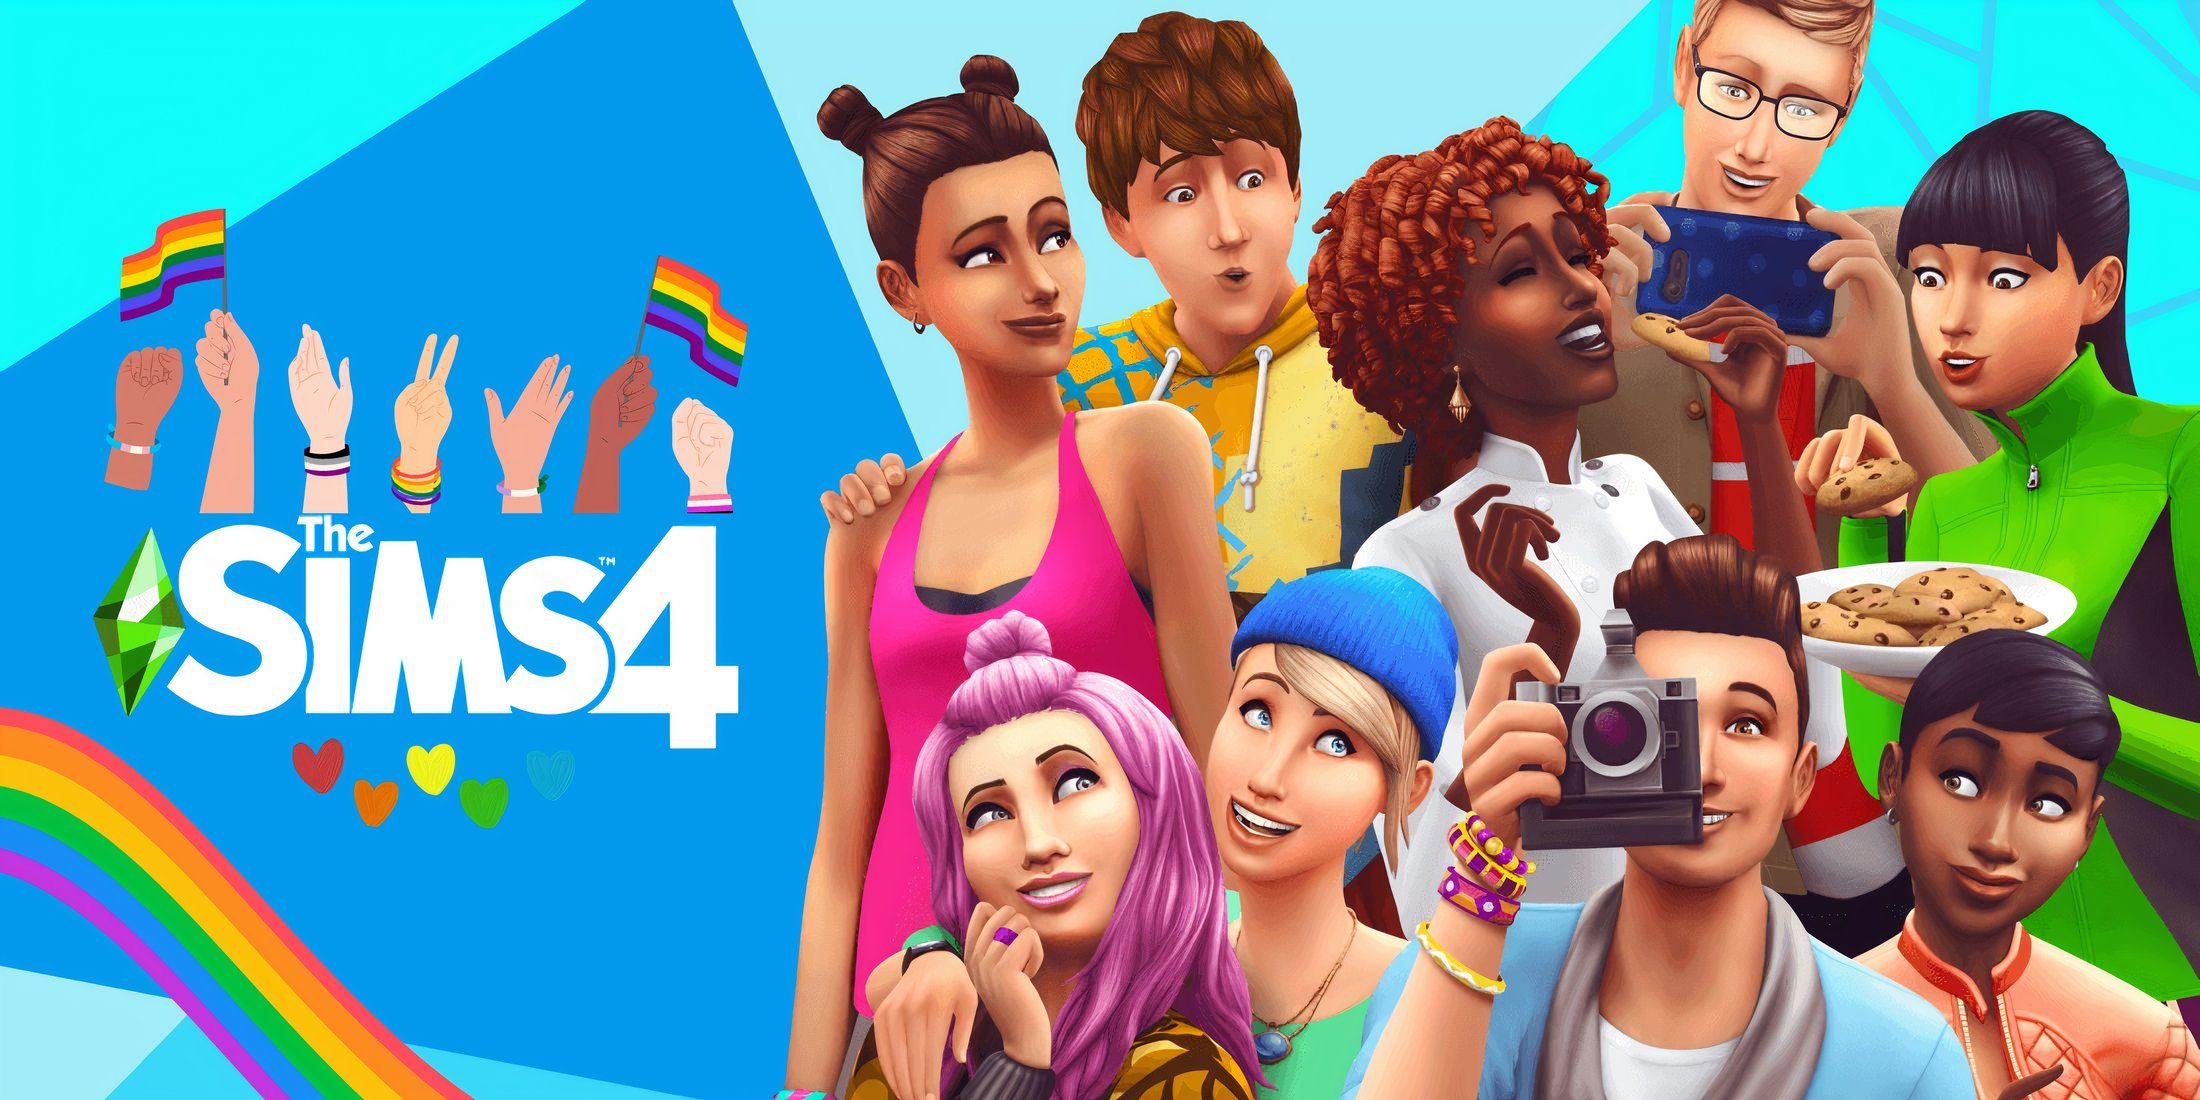 Cover of “Sims 4” with Pride flag.